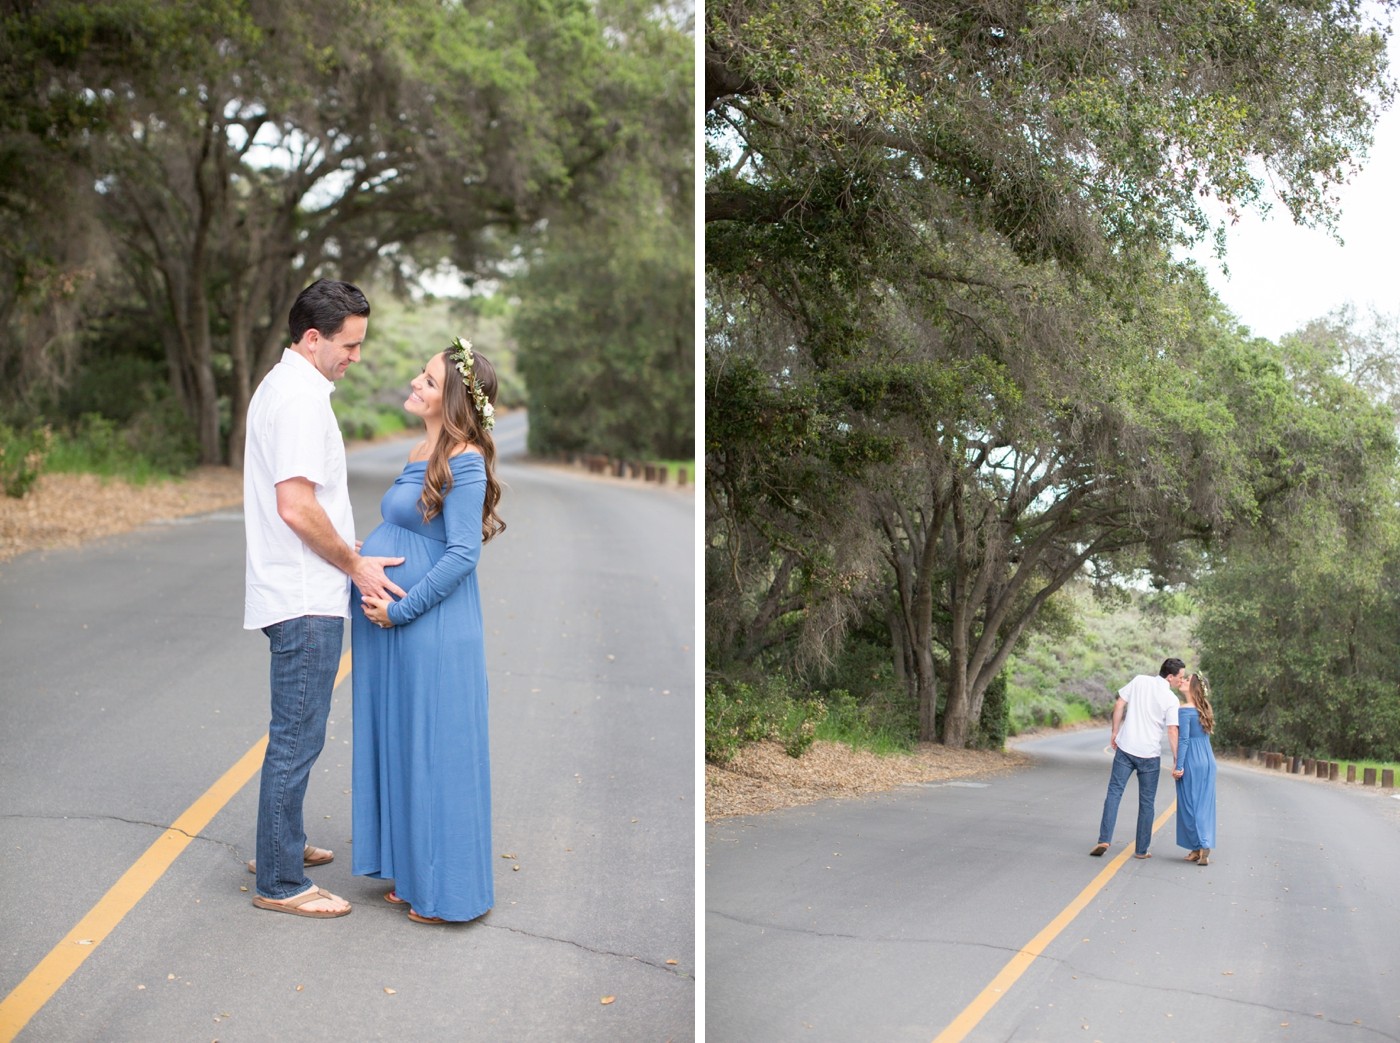 Maternity + Newborn Photography Package